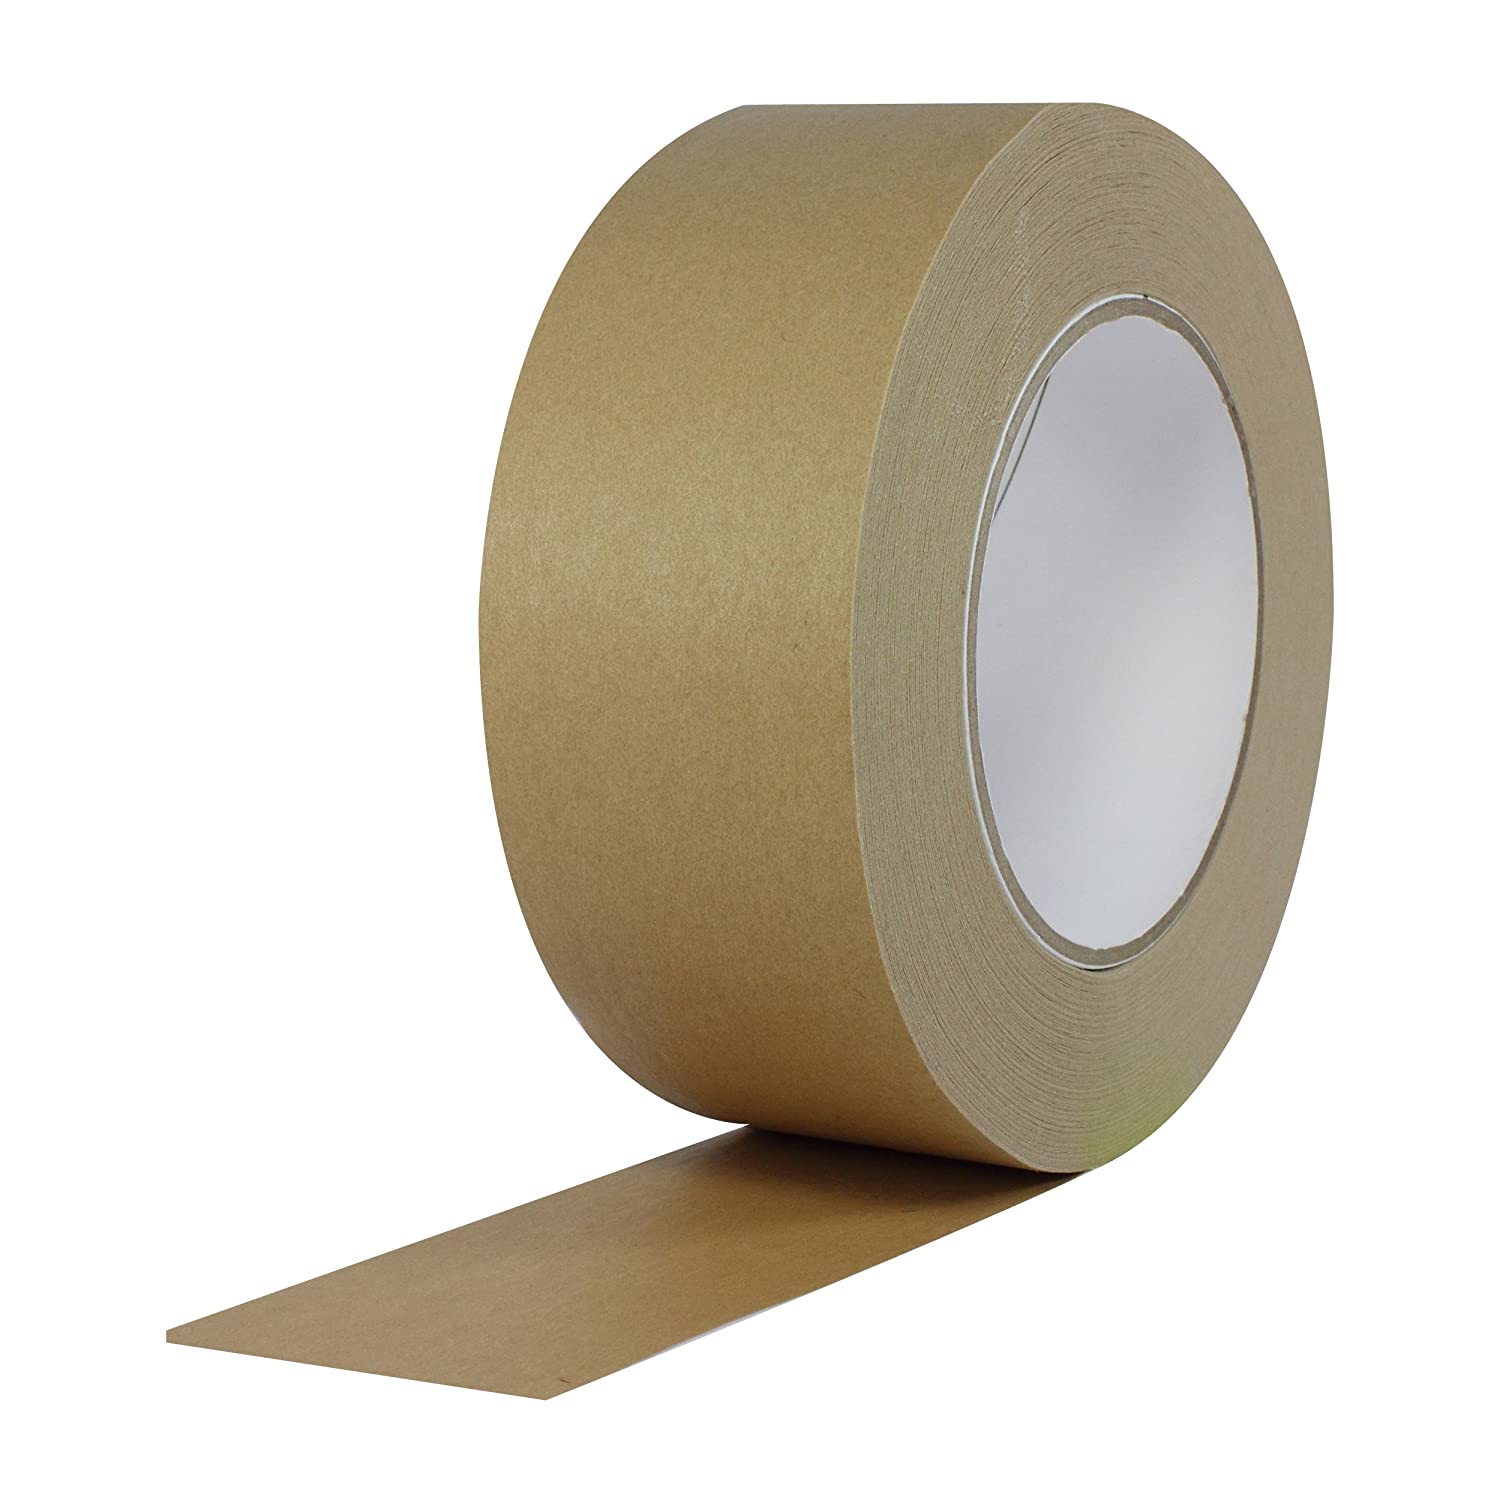 Pro Tapes Hand Tearable Carton Sealing Tape